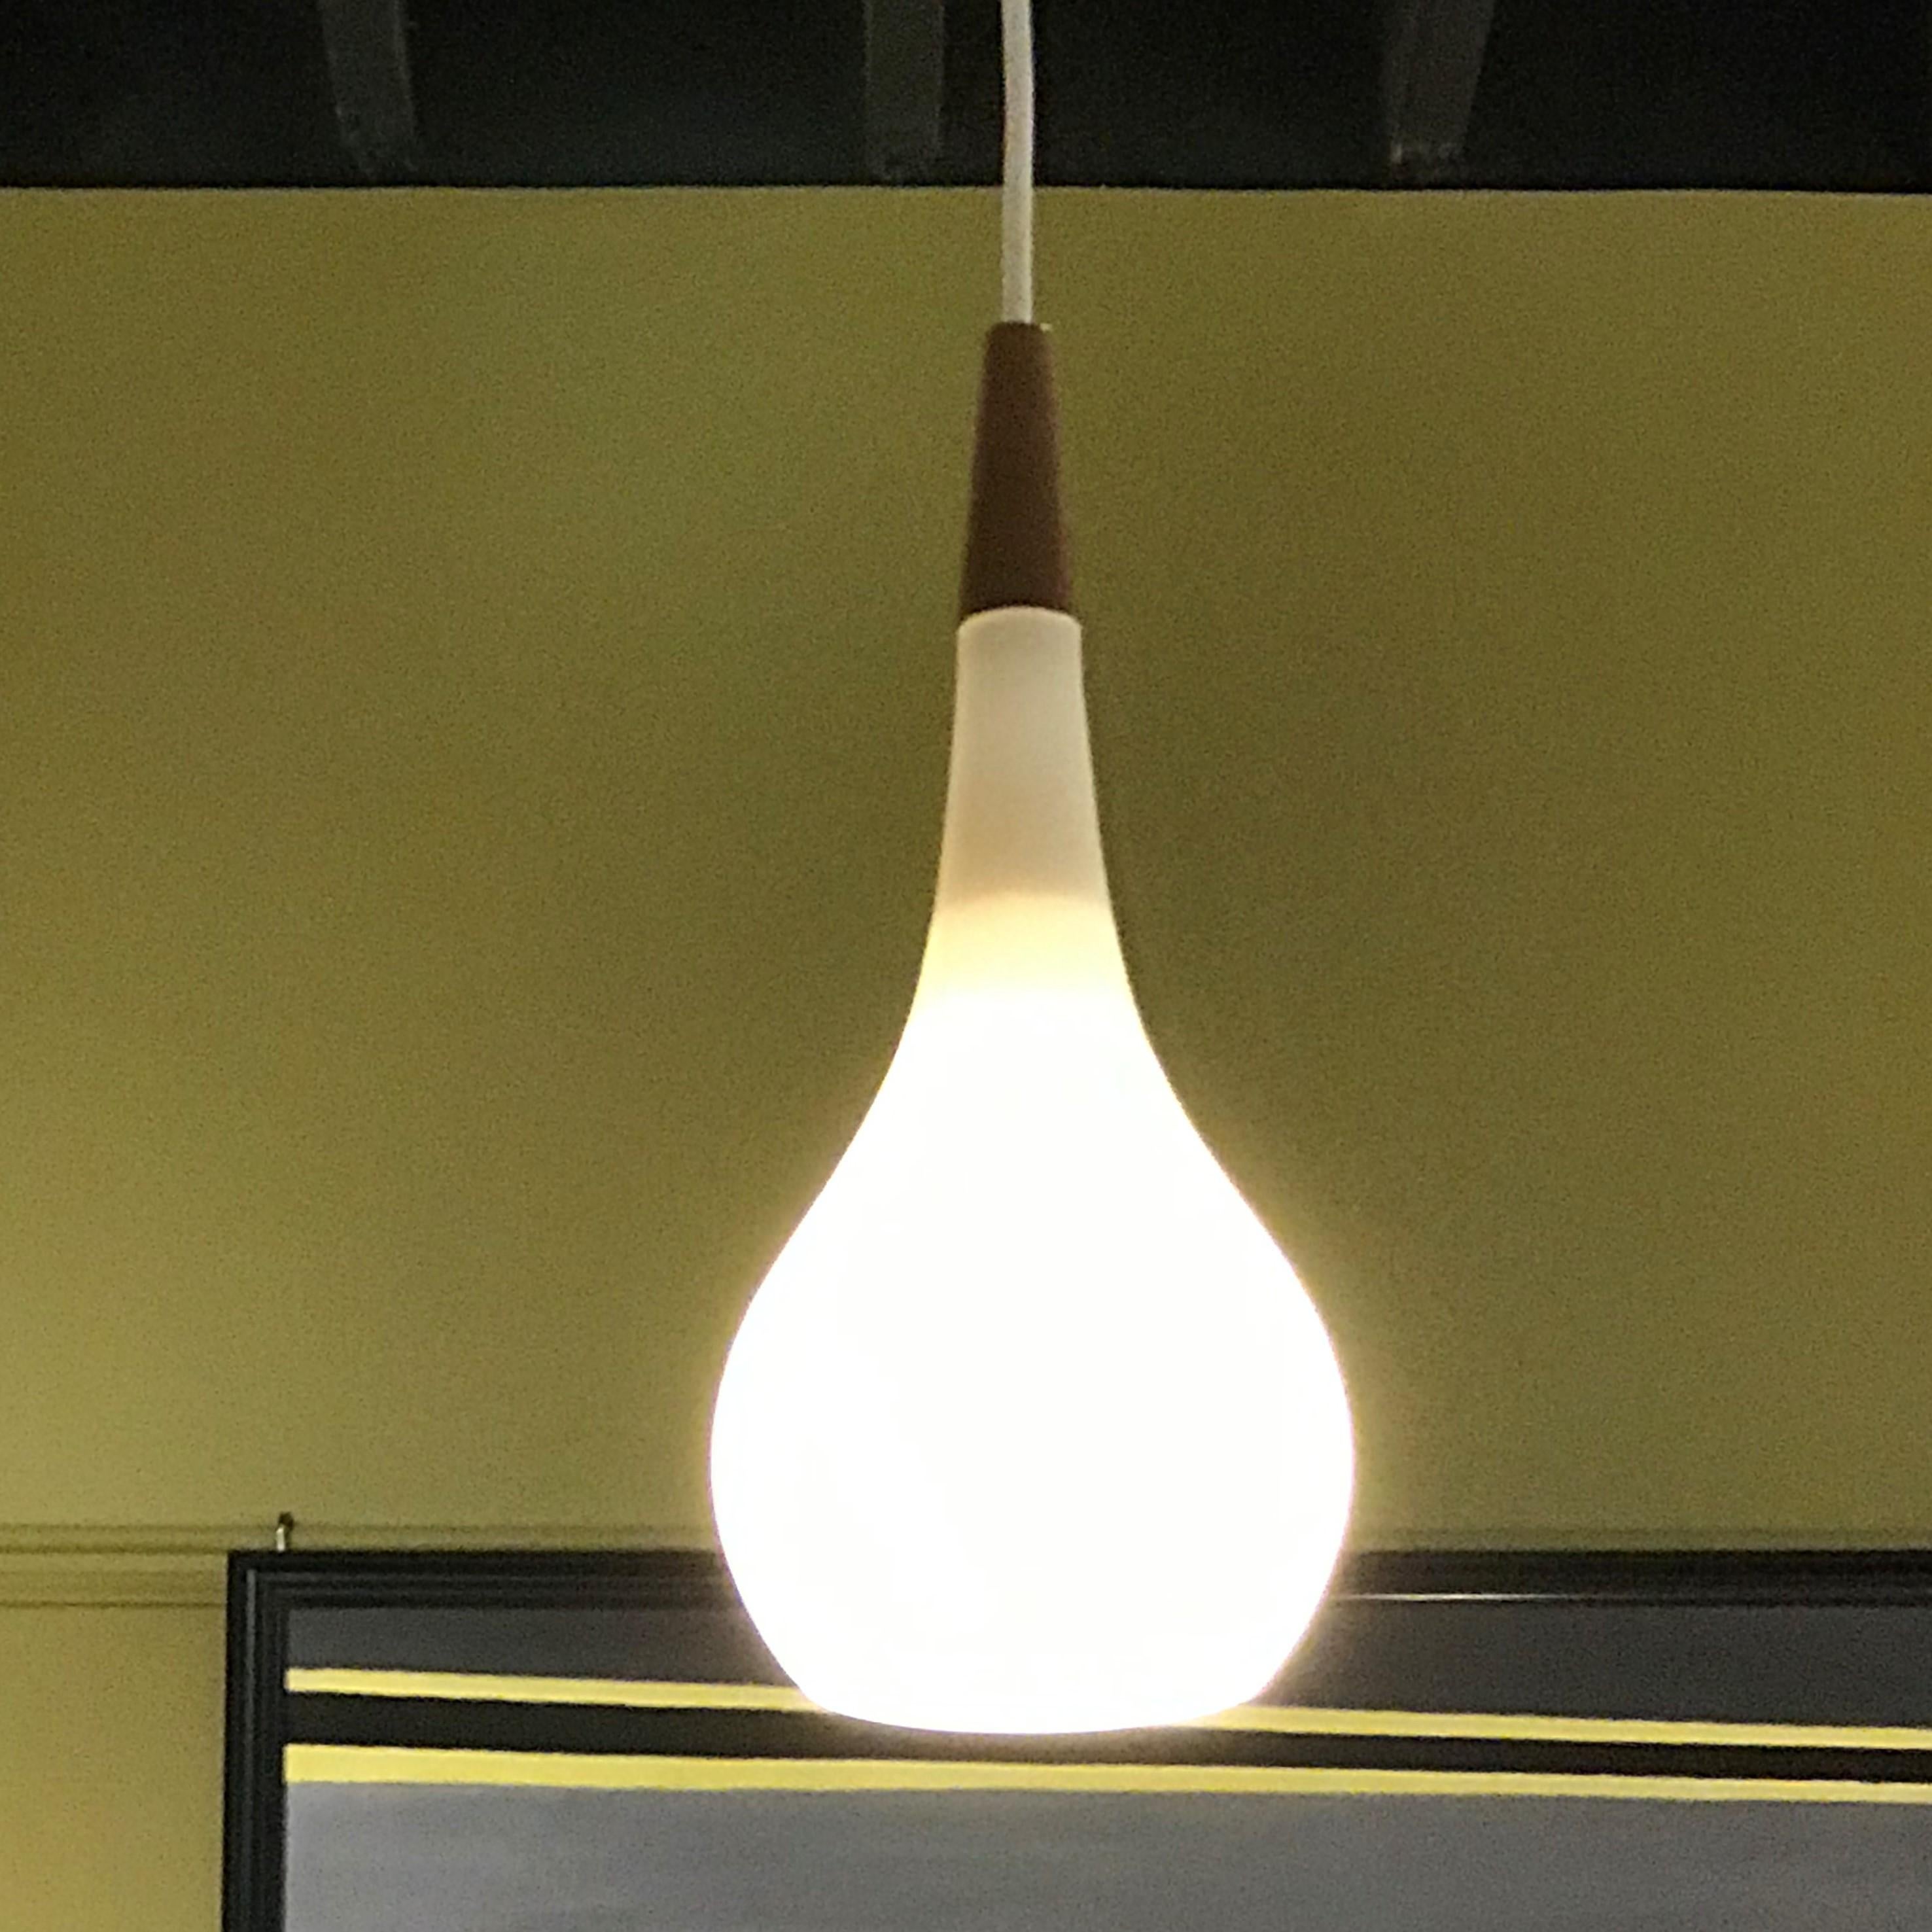 1950s Danish satin glass and teak teardrop pendant. A beautiful teardrop shaped blown satin glass globe with a teak top. Rewired with new cordage and original UL approved socket taking a standard base bulb and new ceiling canopy. 75 watts max, we